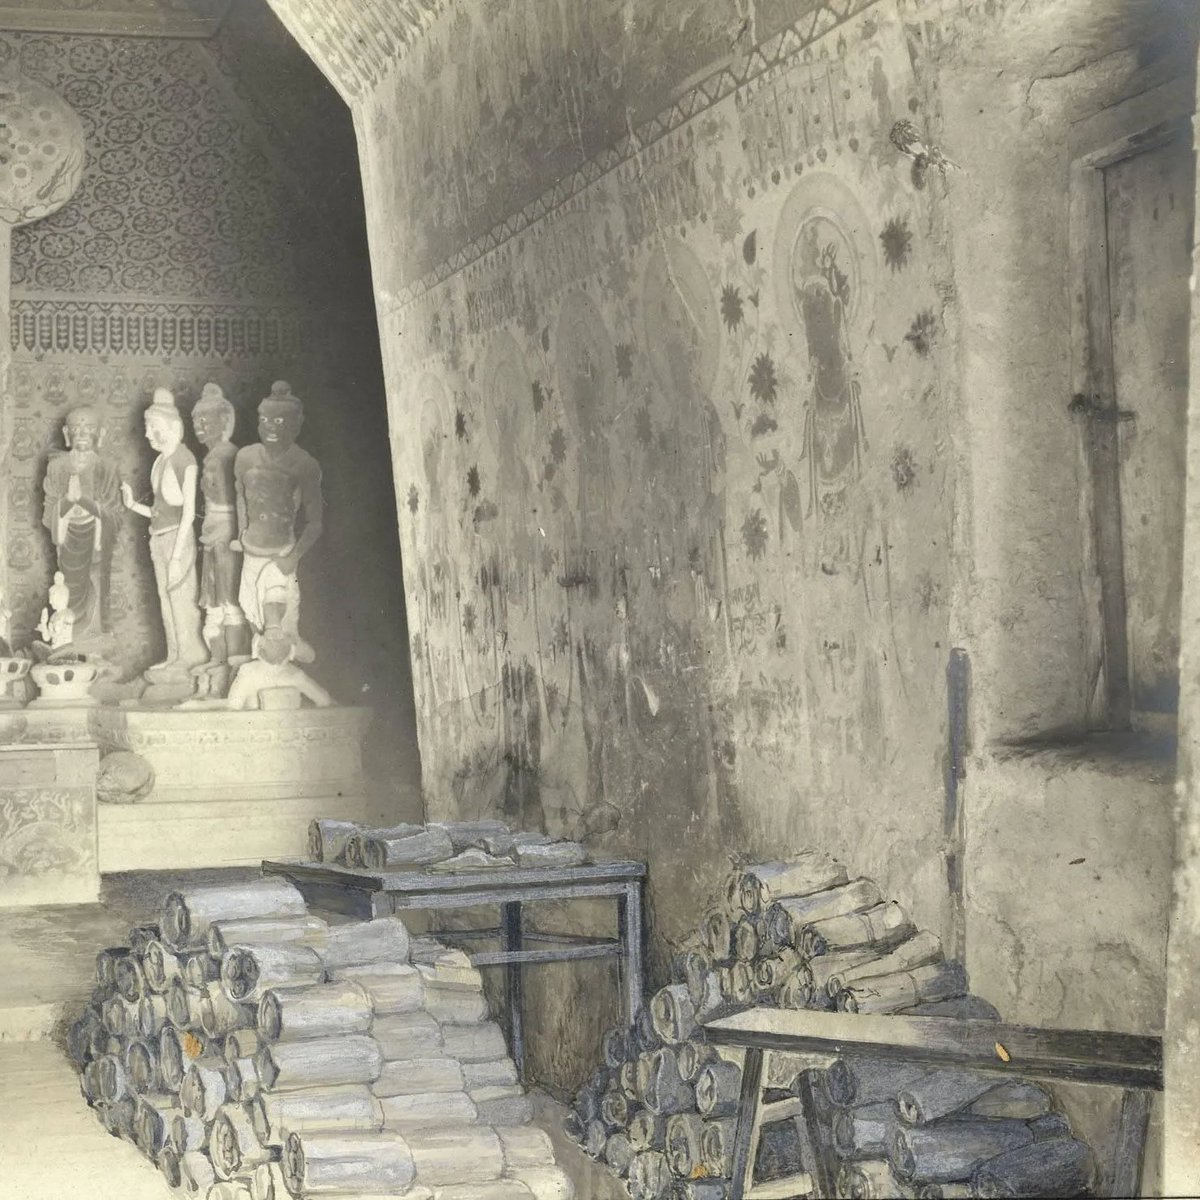 1900.6.22 A hidden “library” was found at Mogao Caves in Dunhuang. Sealed behind a wall ca. 1000 AD, it's packed with tens of thousands of manuscripts & paintings dating to as early as 4C AD. Most contents are Buddhist or in Chinese, but many of other religions & in non-Chinese: